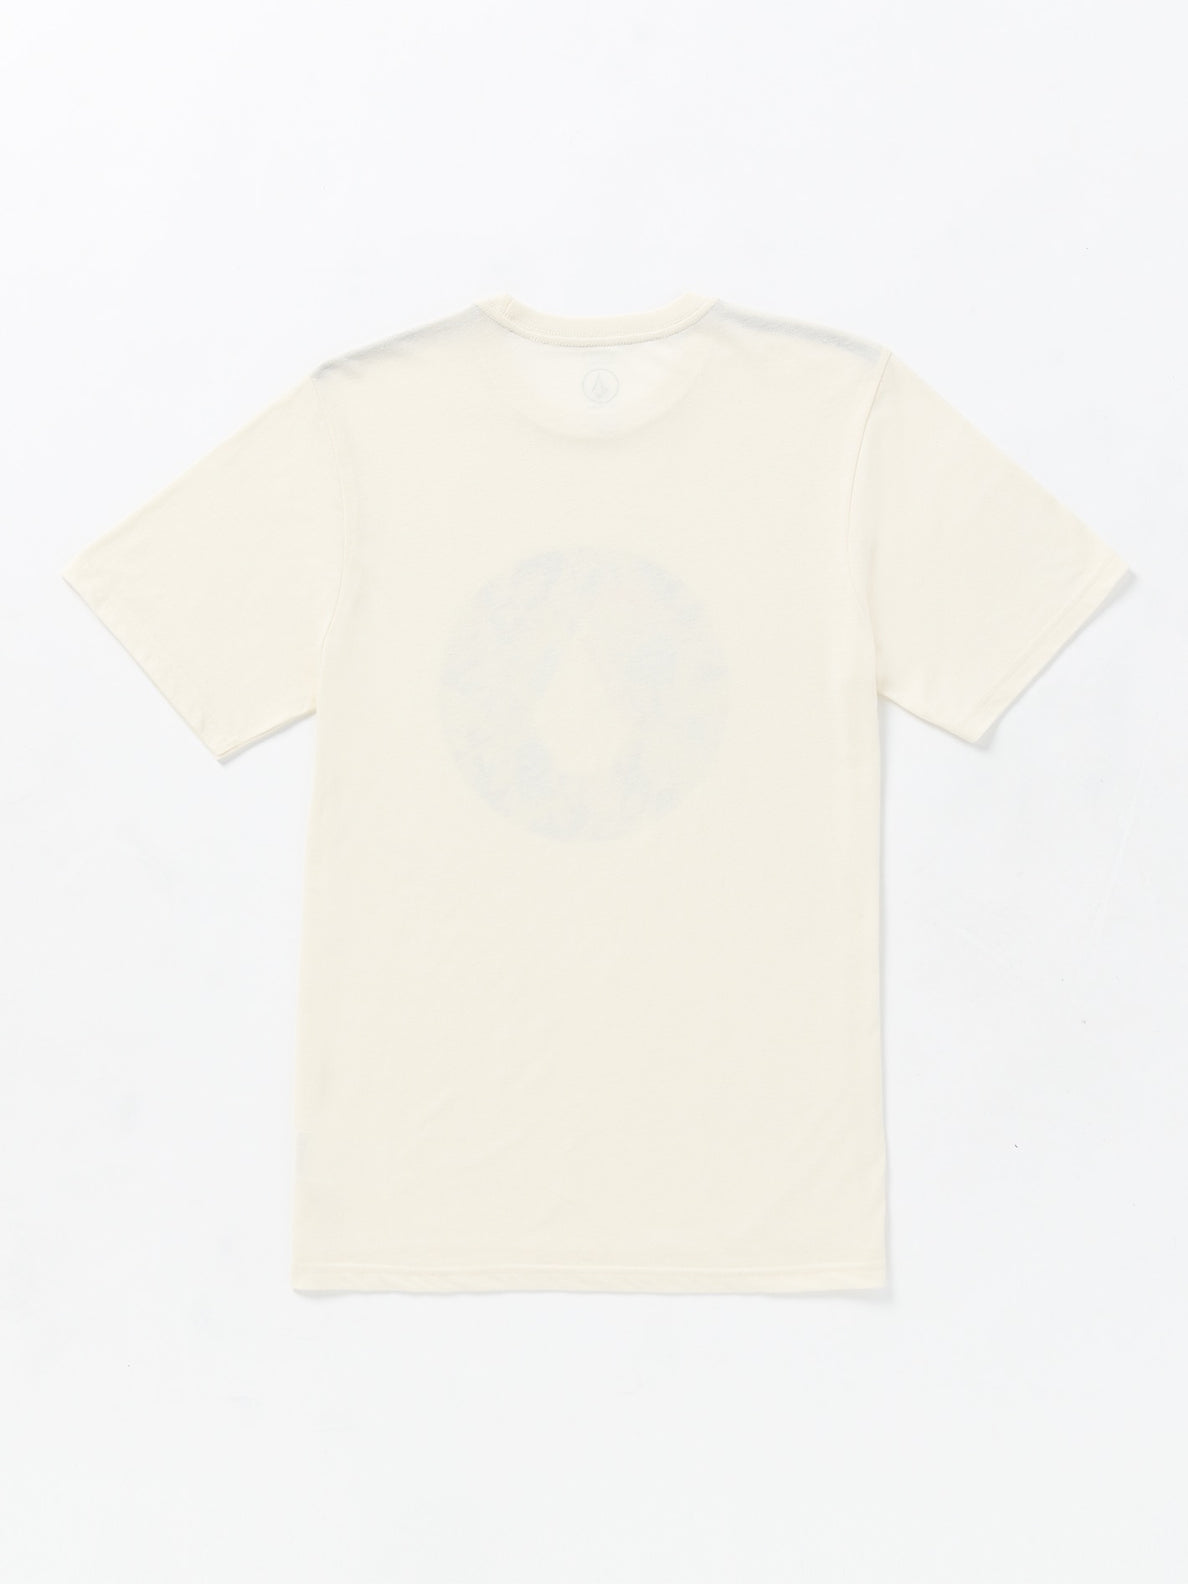 Fill It Up Short Sleeve Tee - Off White Heather